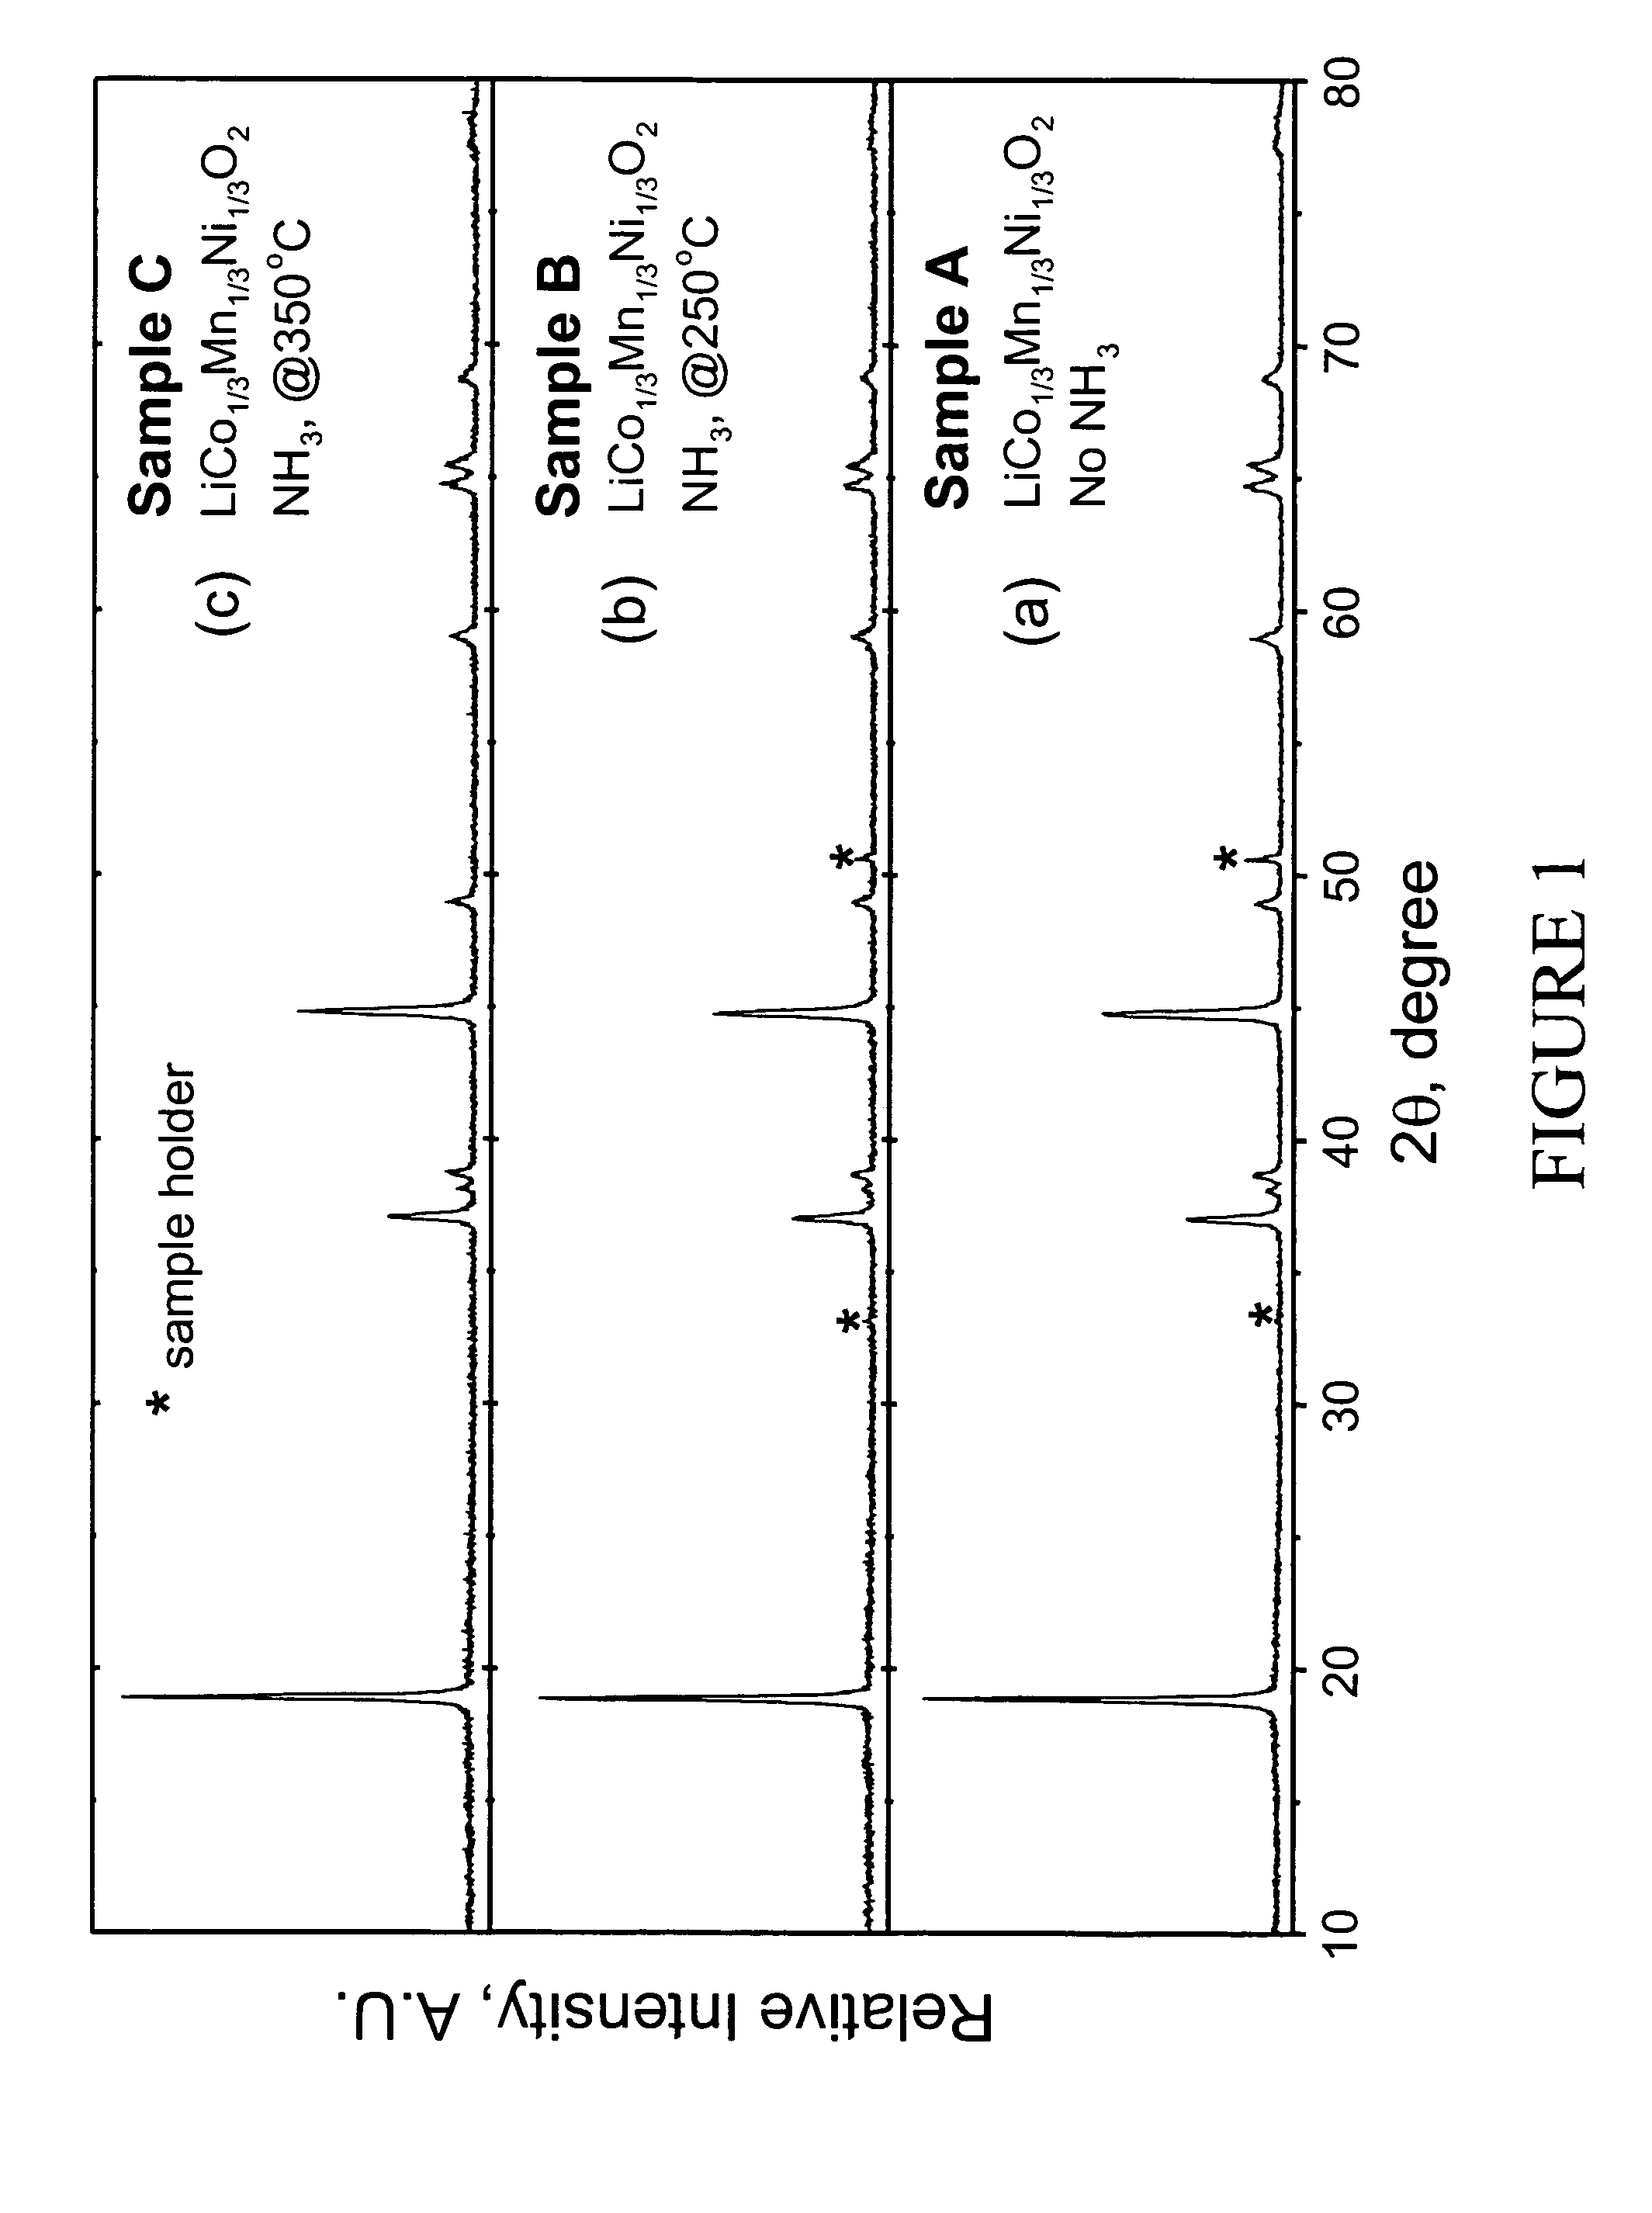 Lithium metal oxide electrodes for lithium batteries